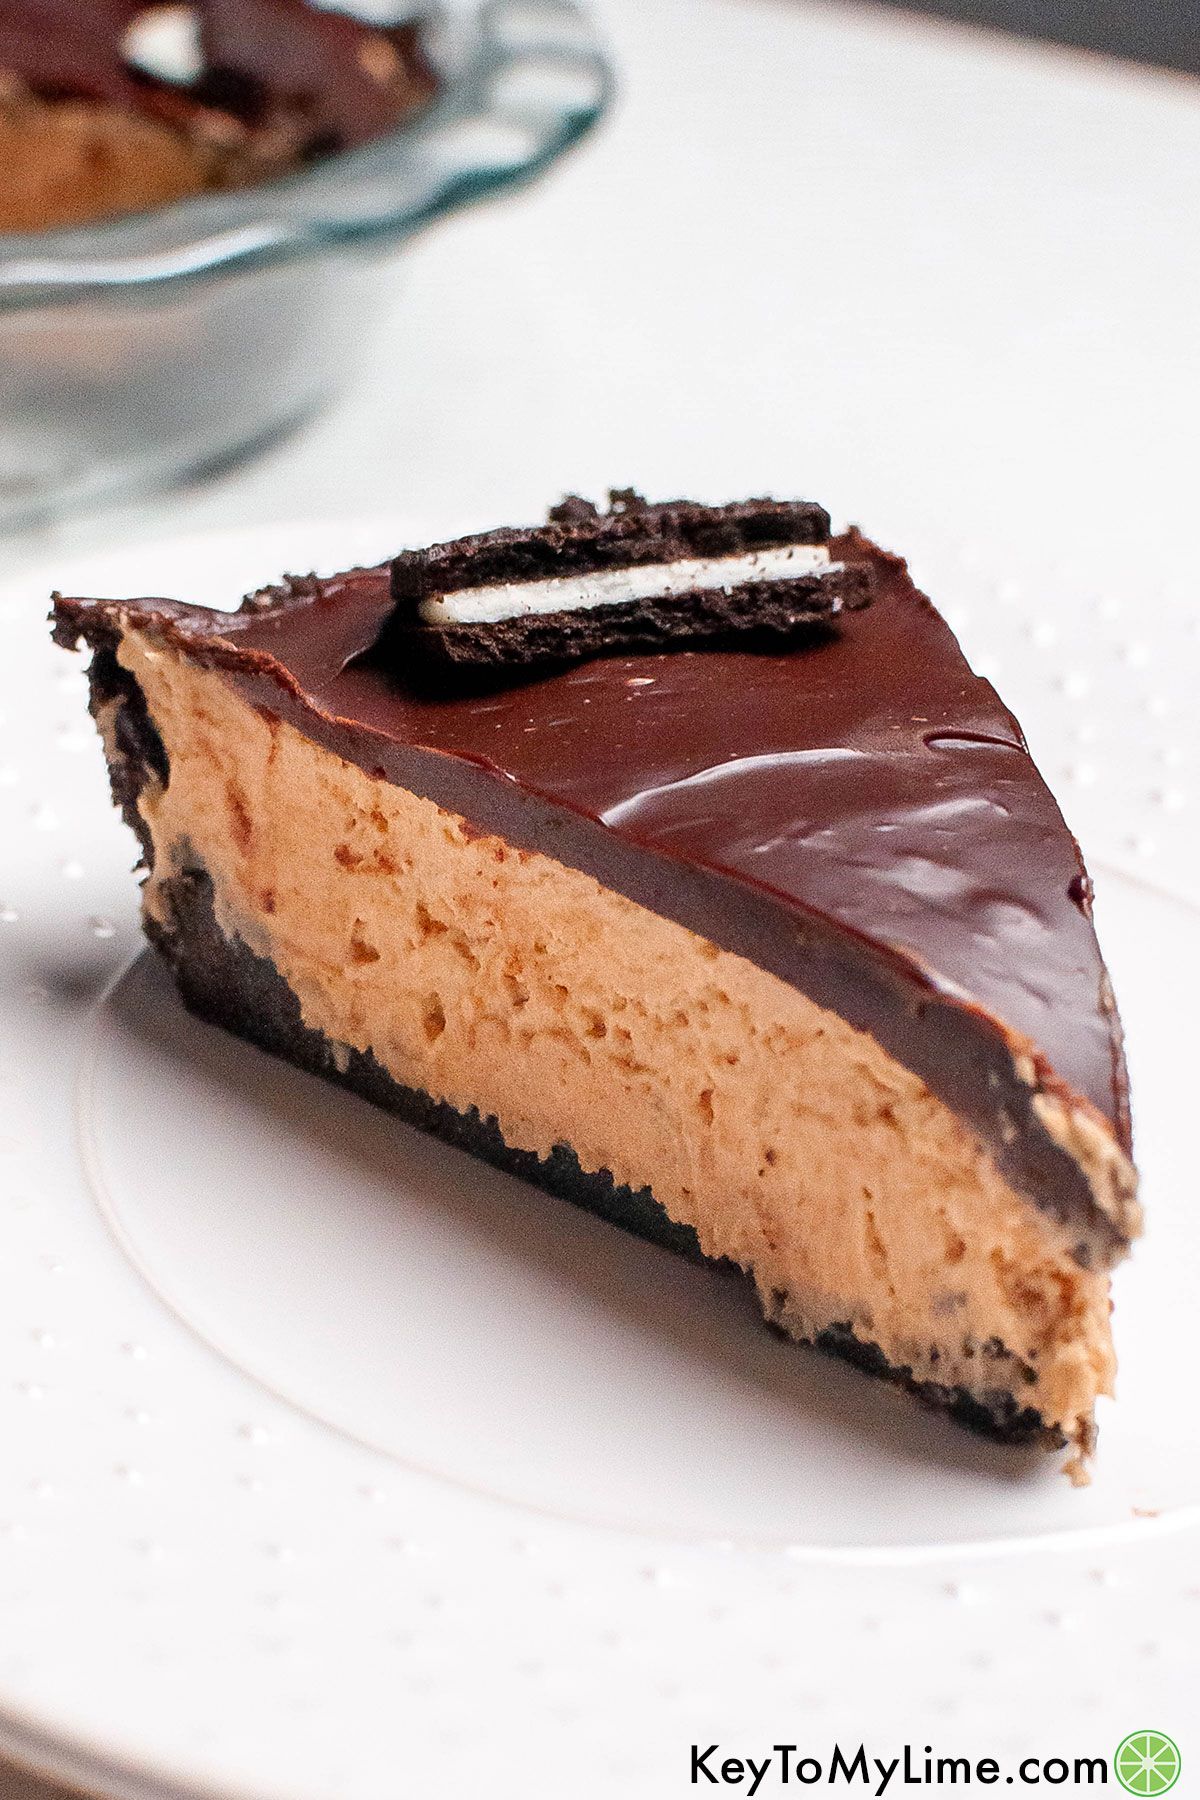 A slice of no bake chocolate peanut butter pie garnished with an oreo.